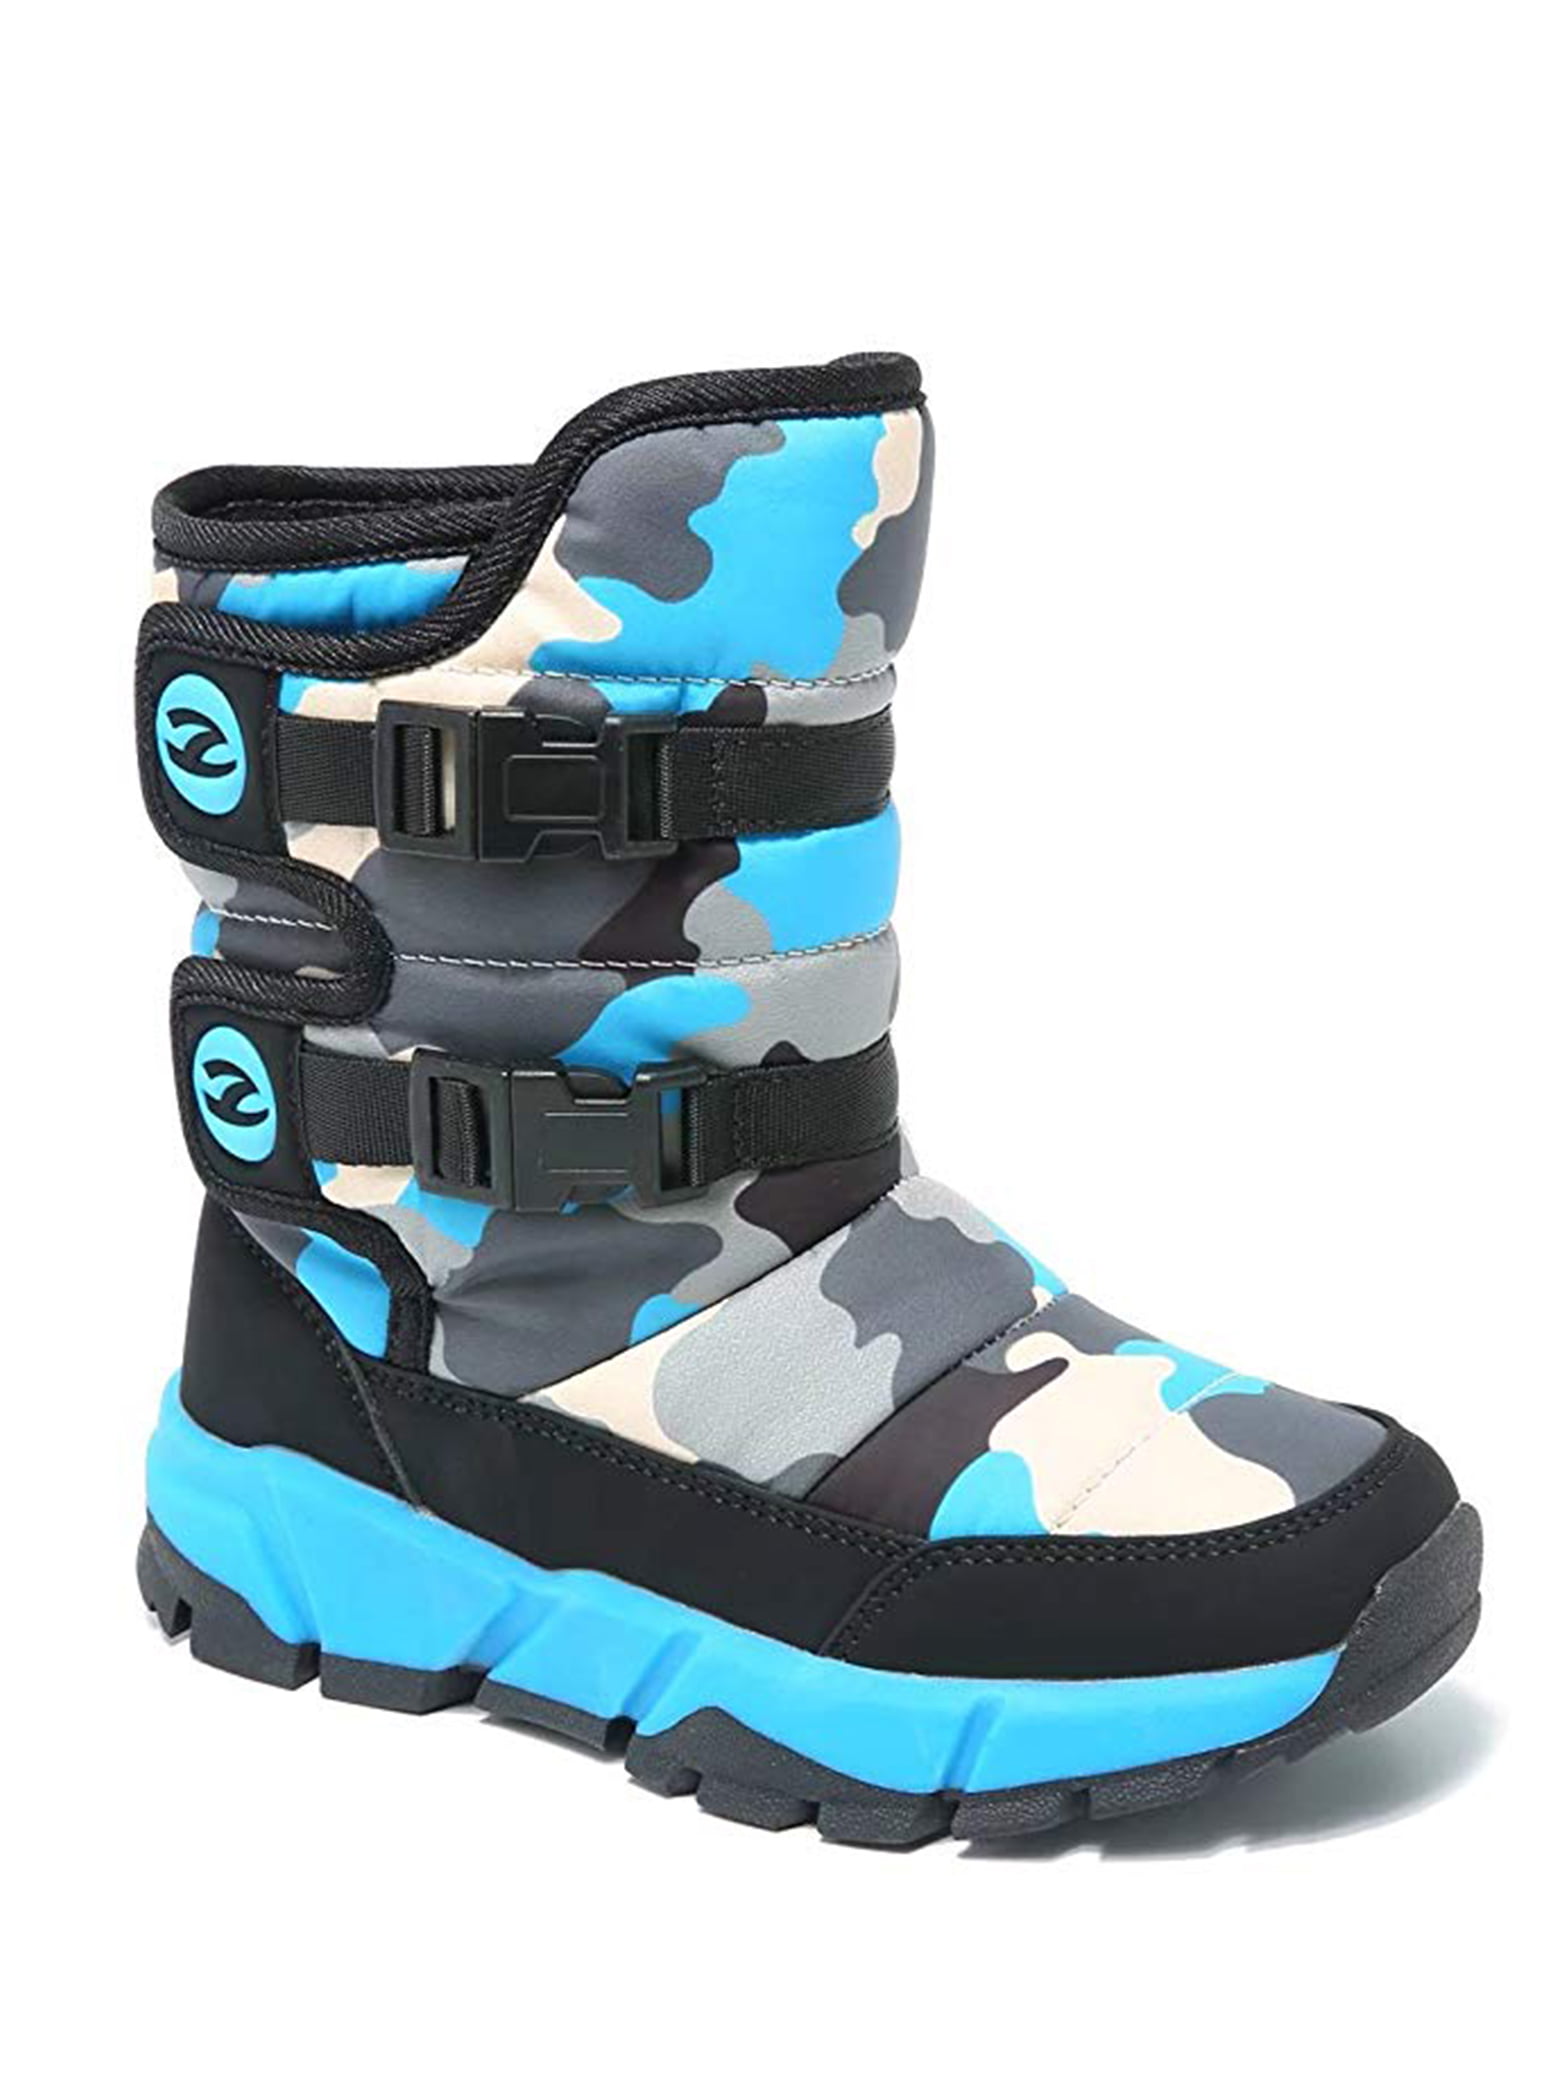 Kids Hiking Boots Boys Waterproof Snow Boots Winter Boots for Girl Sneaker